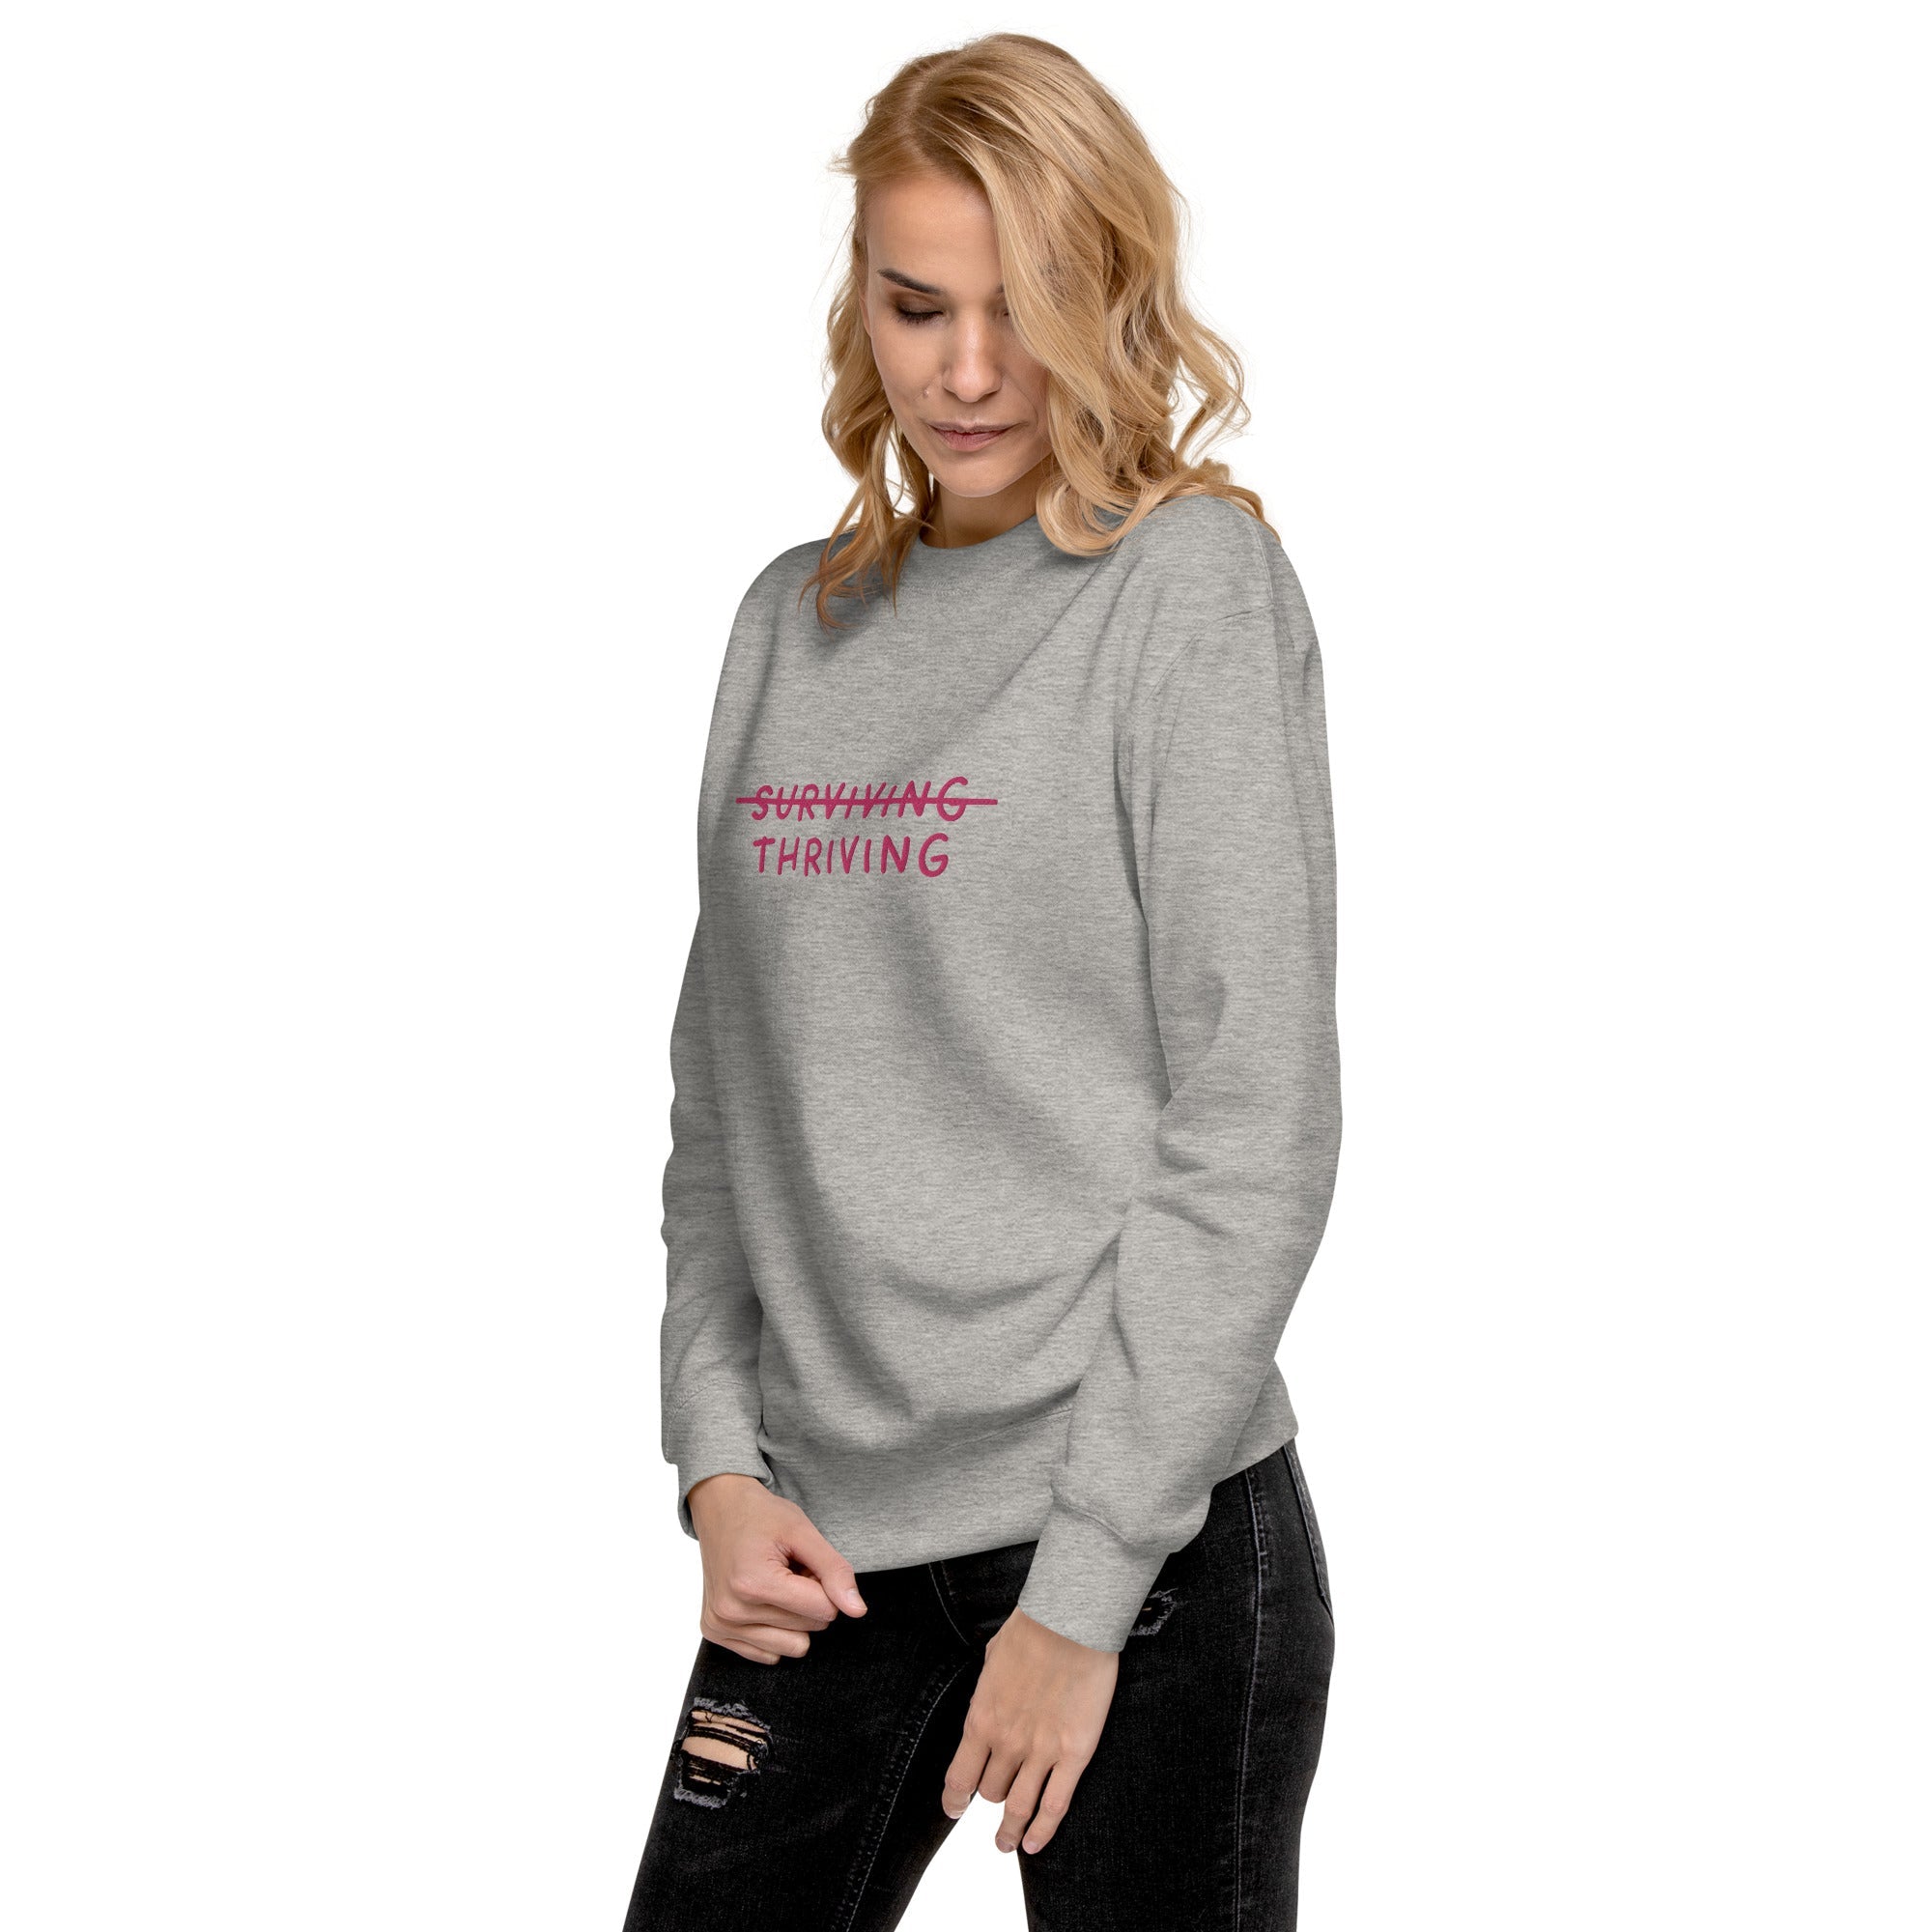 Thriving Not Surviving Embroidered Unisex Premium Sweatshirt - The Kindness Cause